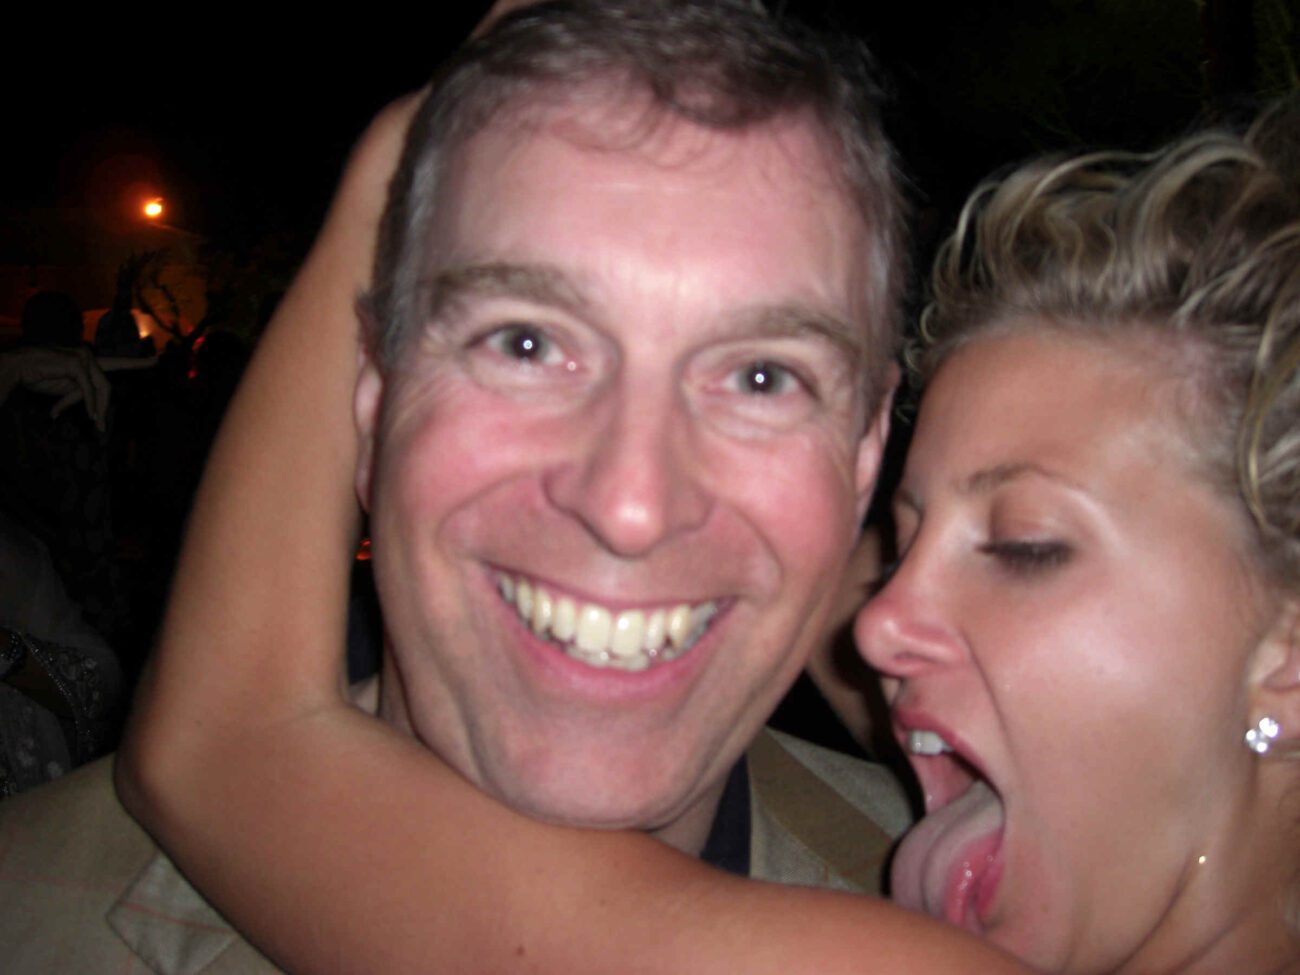 Prince Andrew has been claiming he doesn't like to party, but revealing photos with Chris Von Aspen might say something different about the Duke.